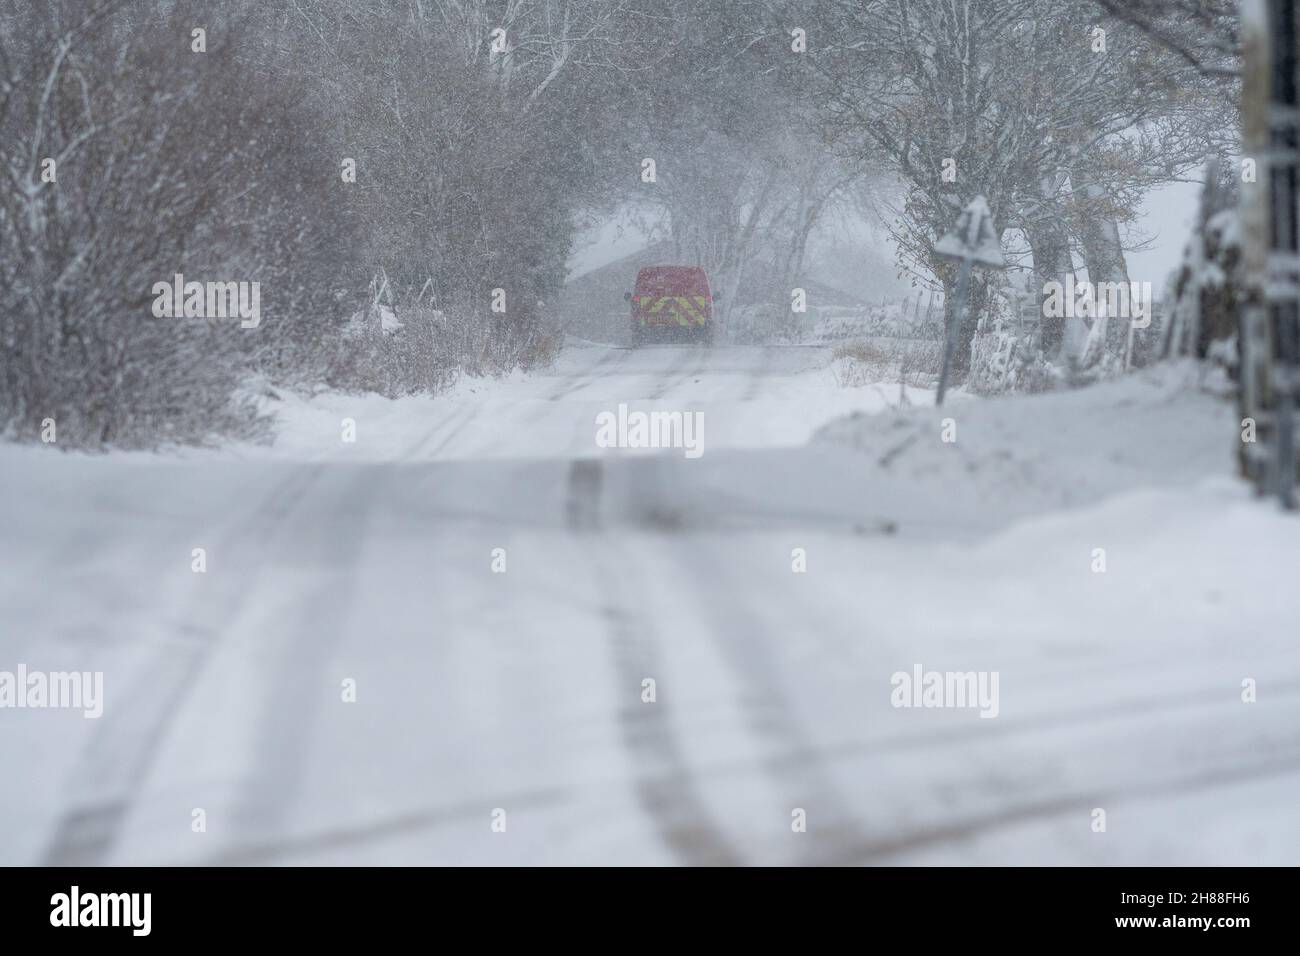 Hawes, North Yorkshire, UK. Nov 28th 2021 - Snow in the aftermath of Storm Arwen is making driving conditions difficult in the Yorkshire Dales, here at Simonstone, near Hawes in Wensleydale, UK. Credit: Wayne HUTCHINSON/Alamy Live News Stock Photo